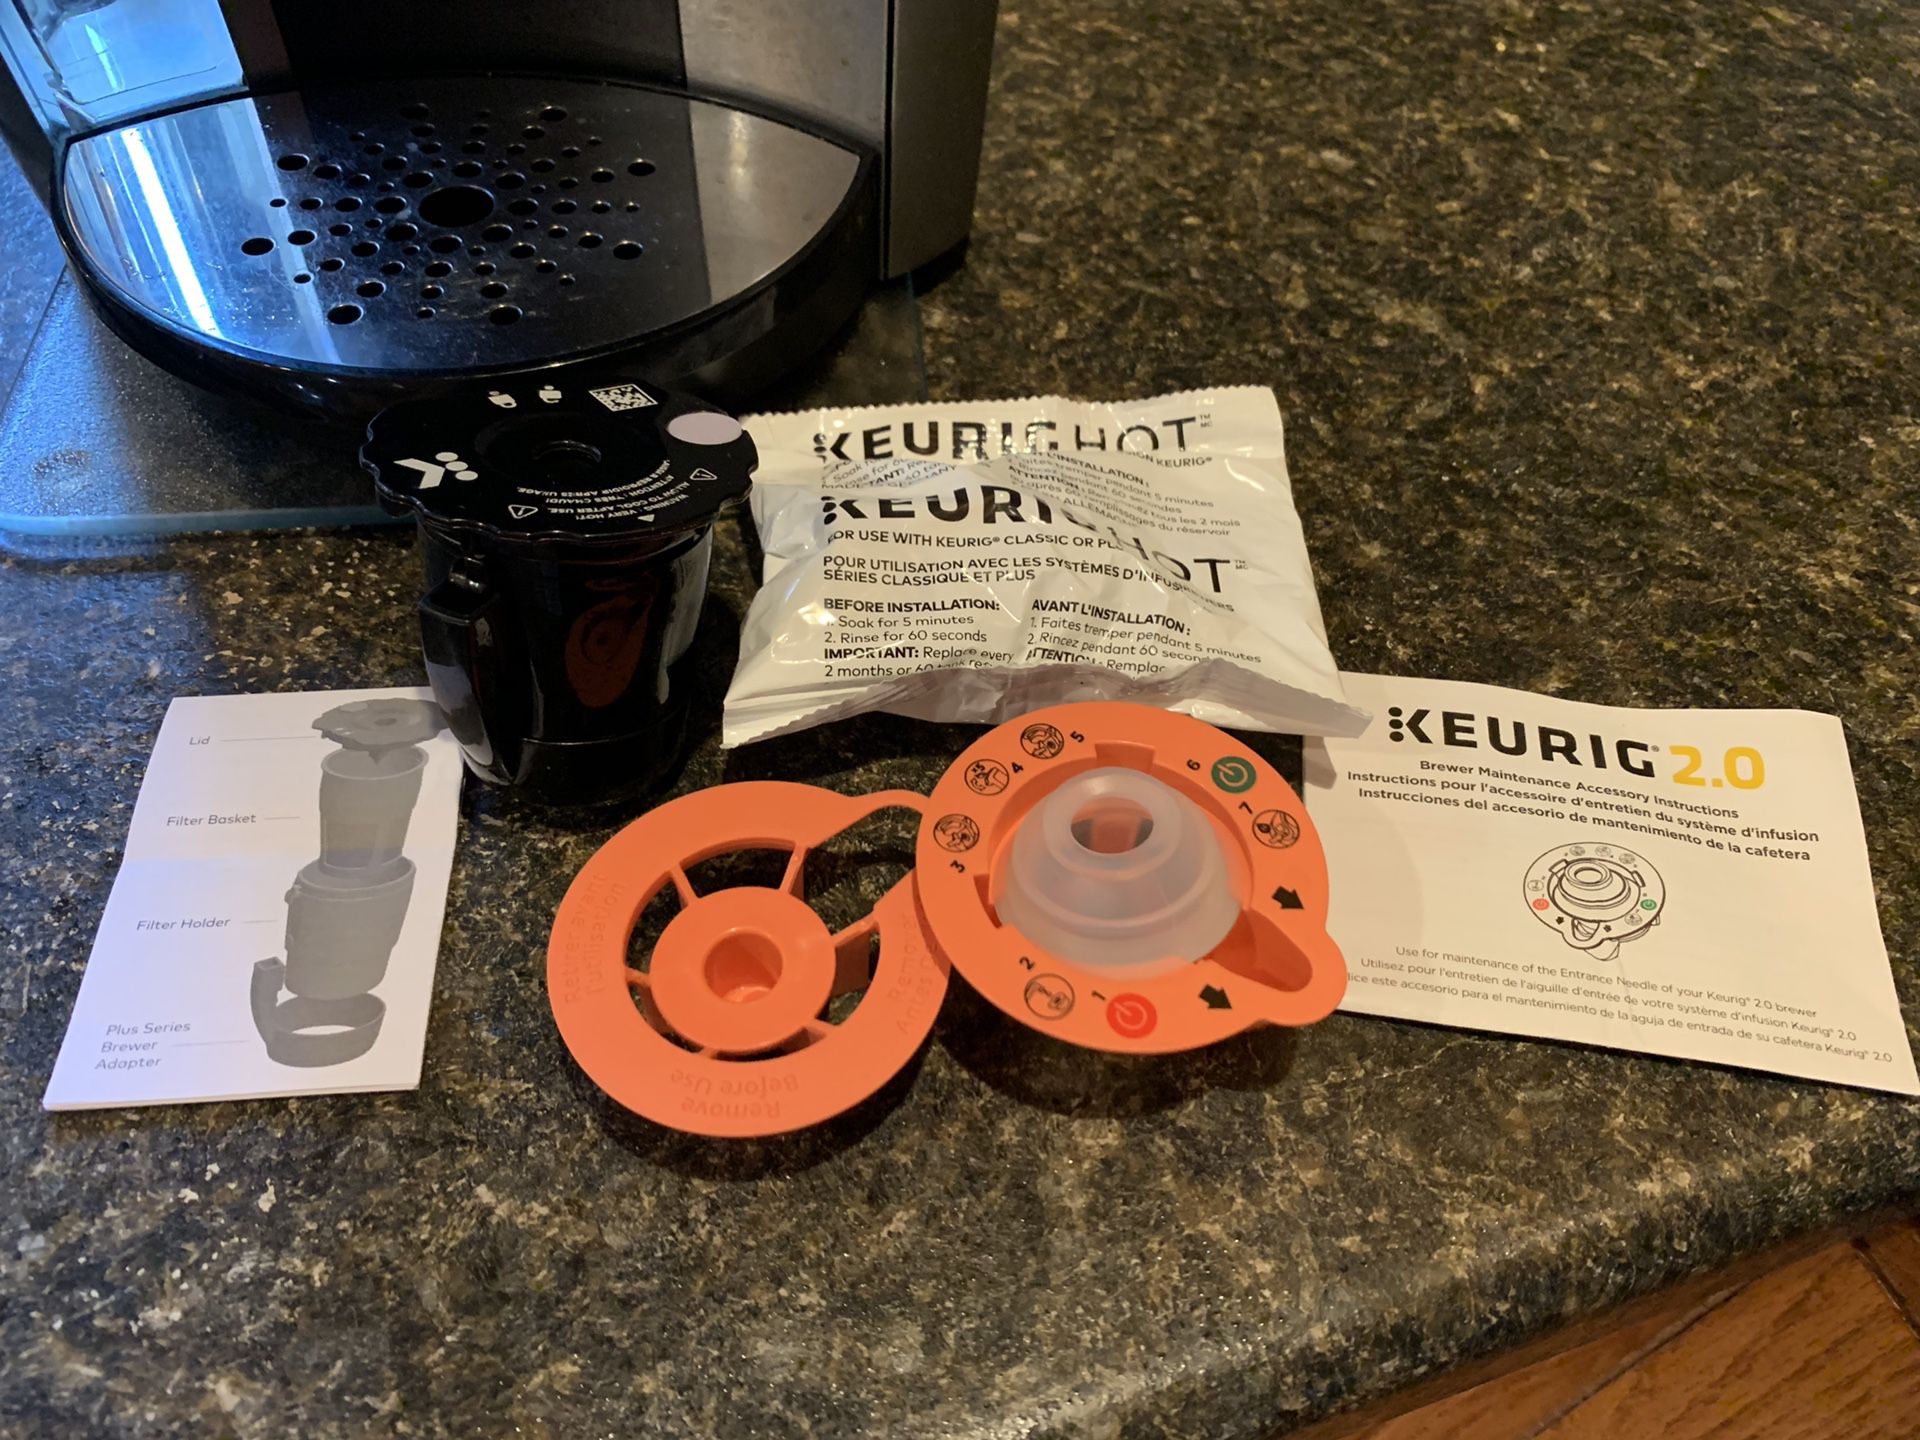 Keurig K Duo Plus Coffee Maker With Single Serve And Carafe for Sale in  Boca Raton, FL - OfferUp